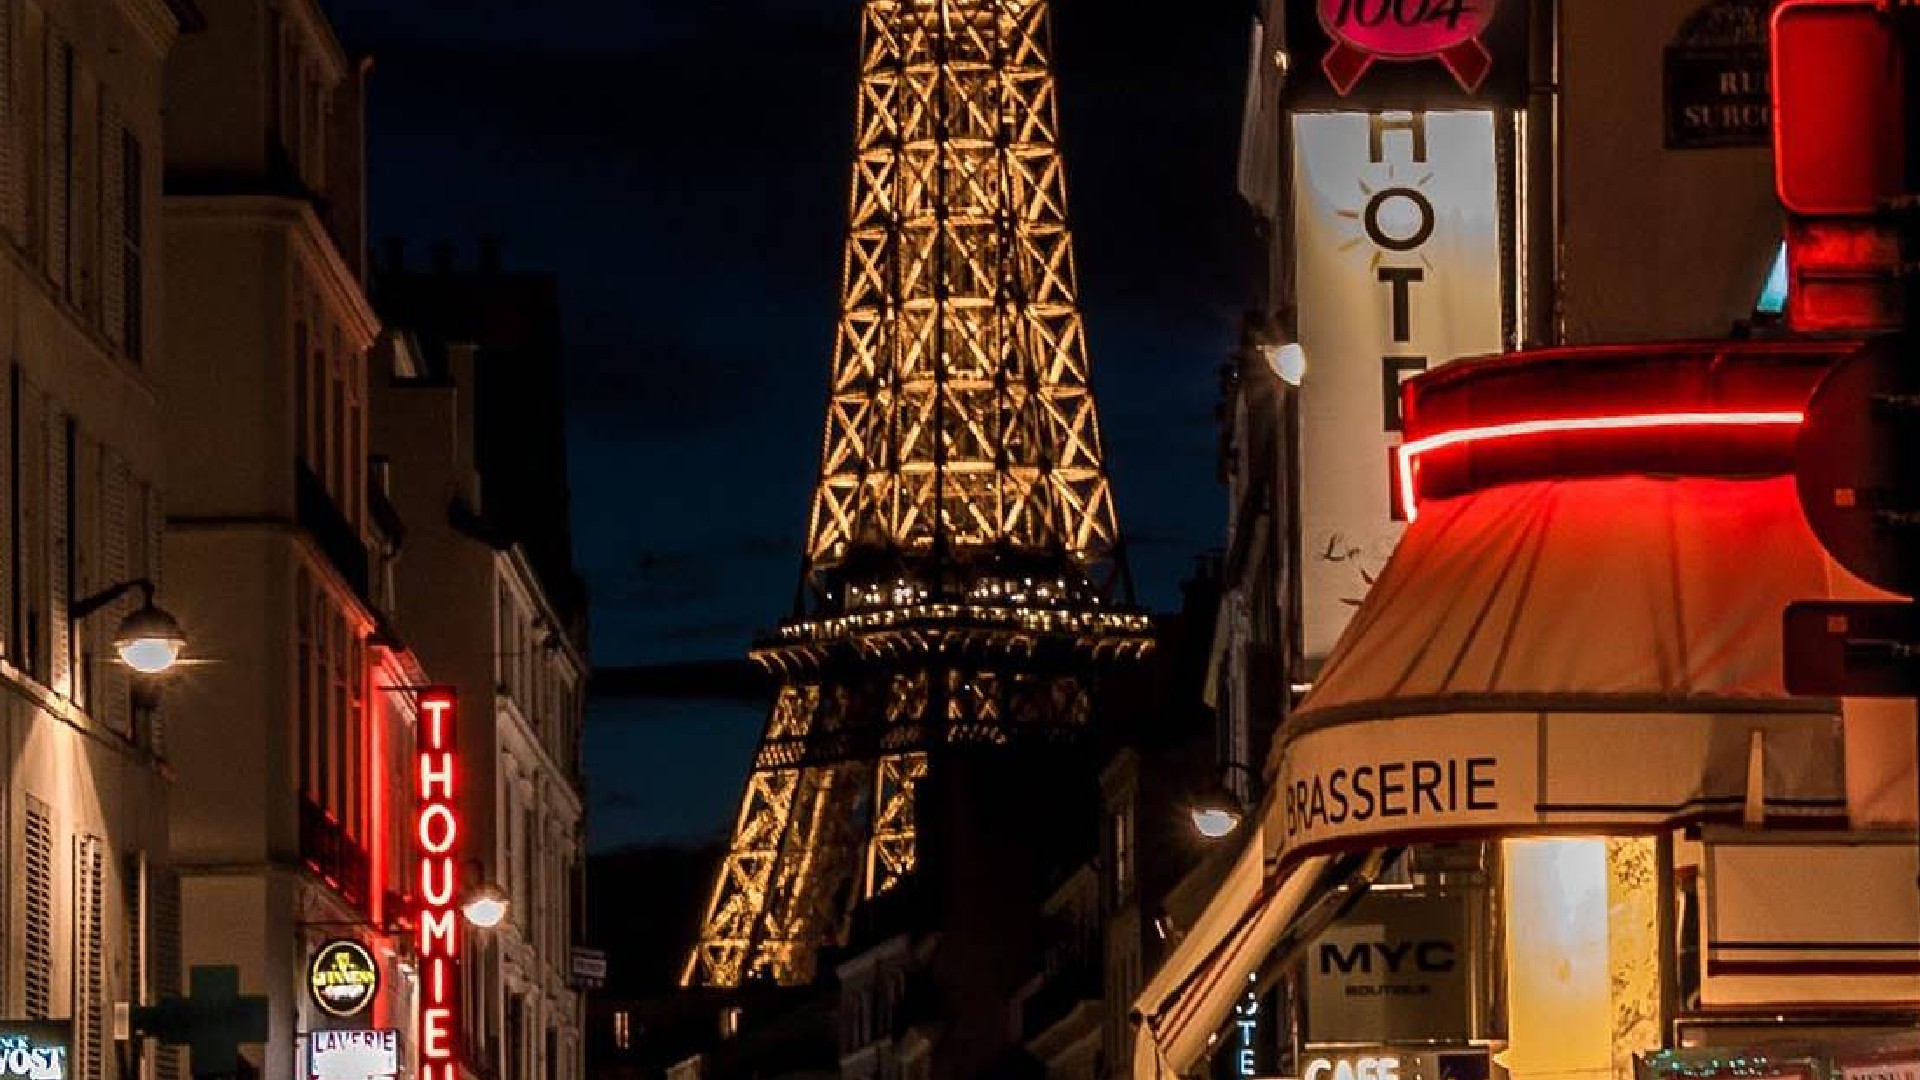 An image of a street in Paris, France. It is night and there are various lit building signs. In the background of the image the eiffel tower is visible, it is well lit.